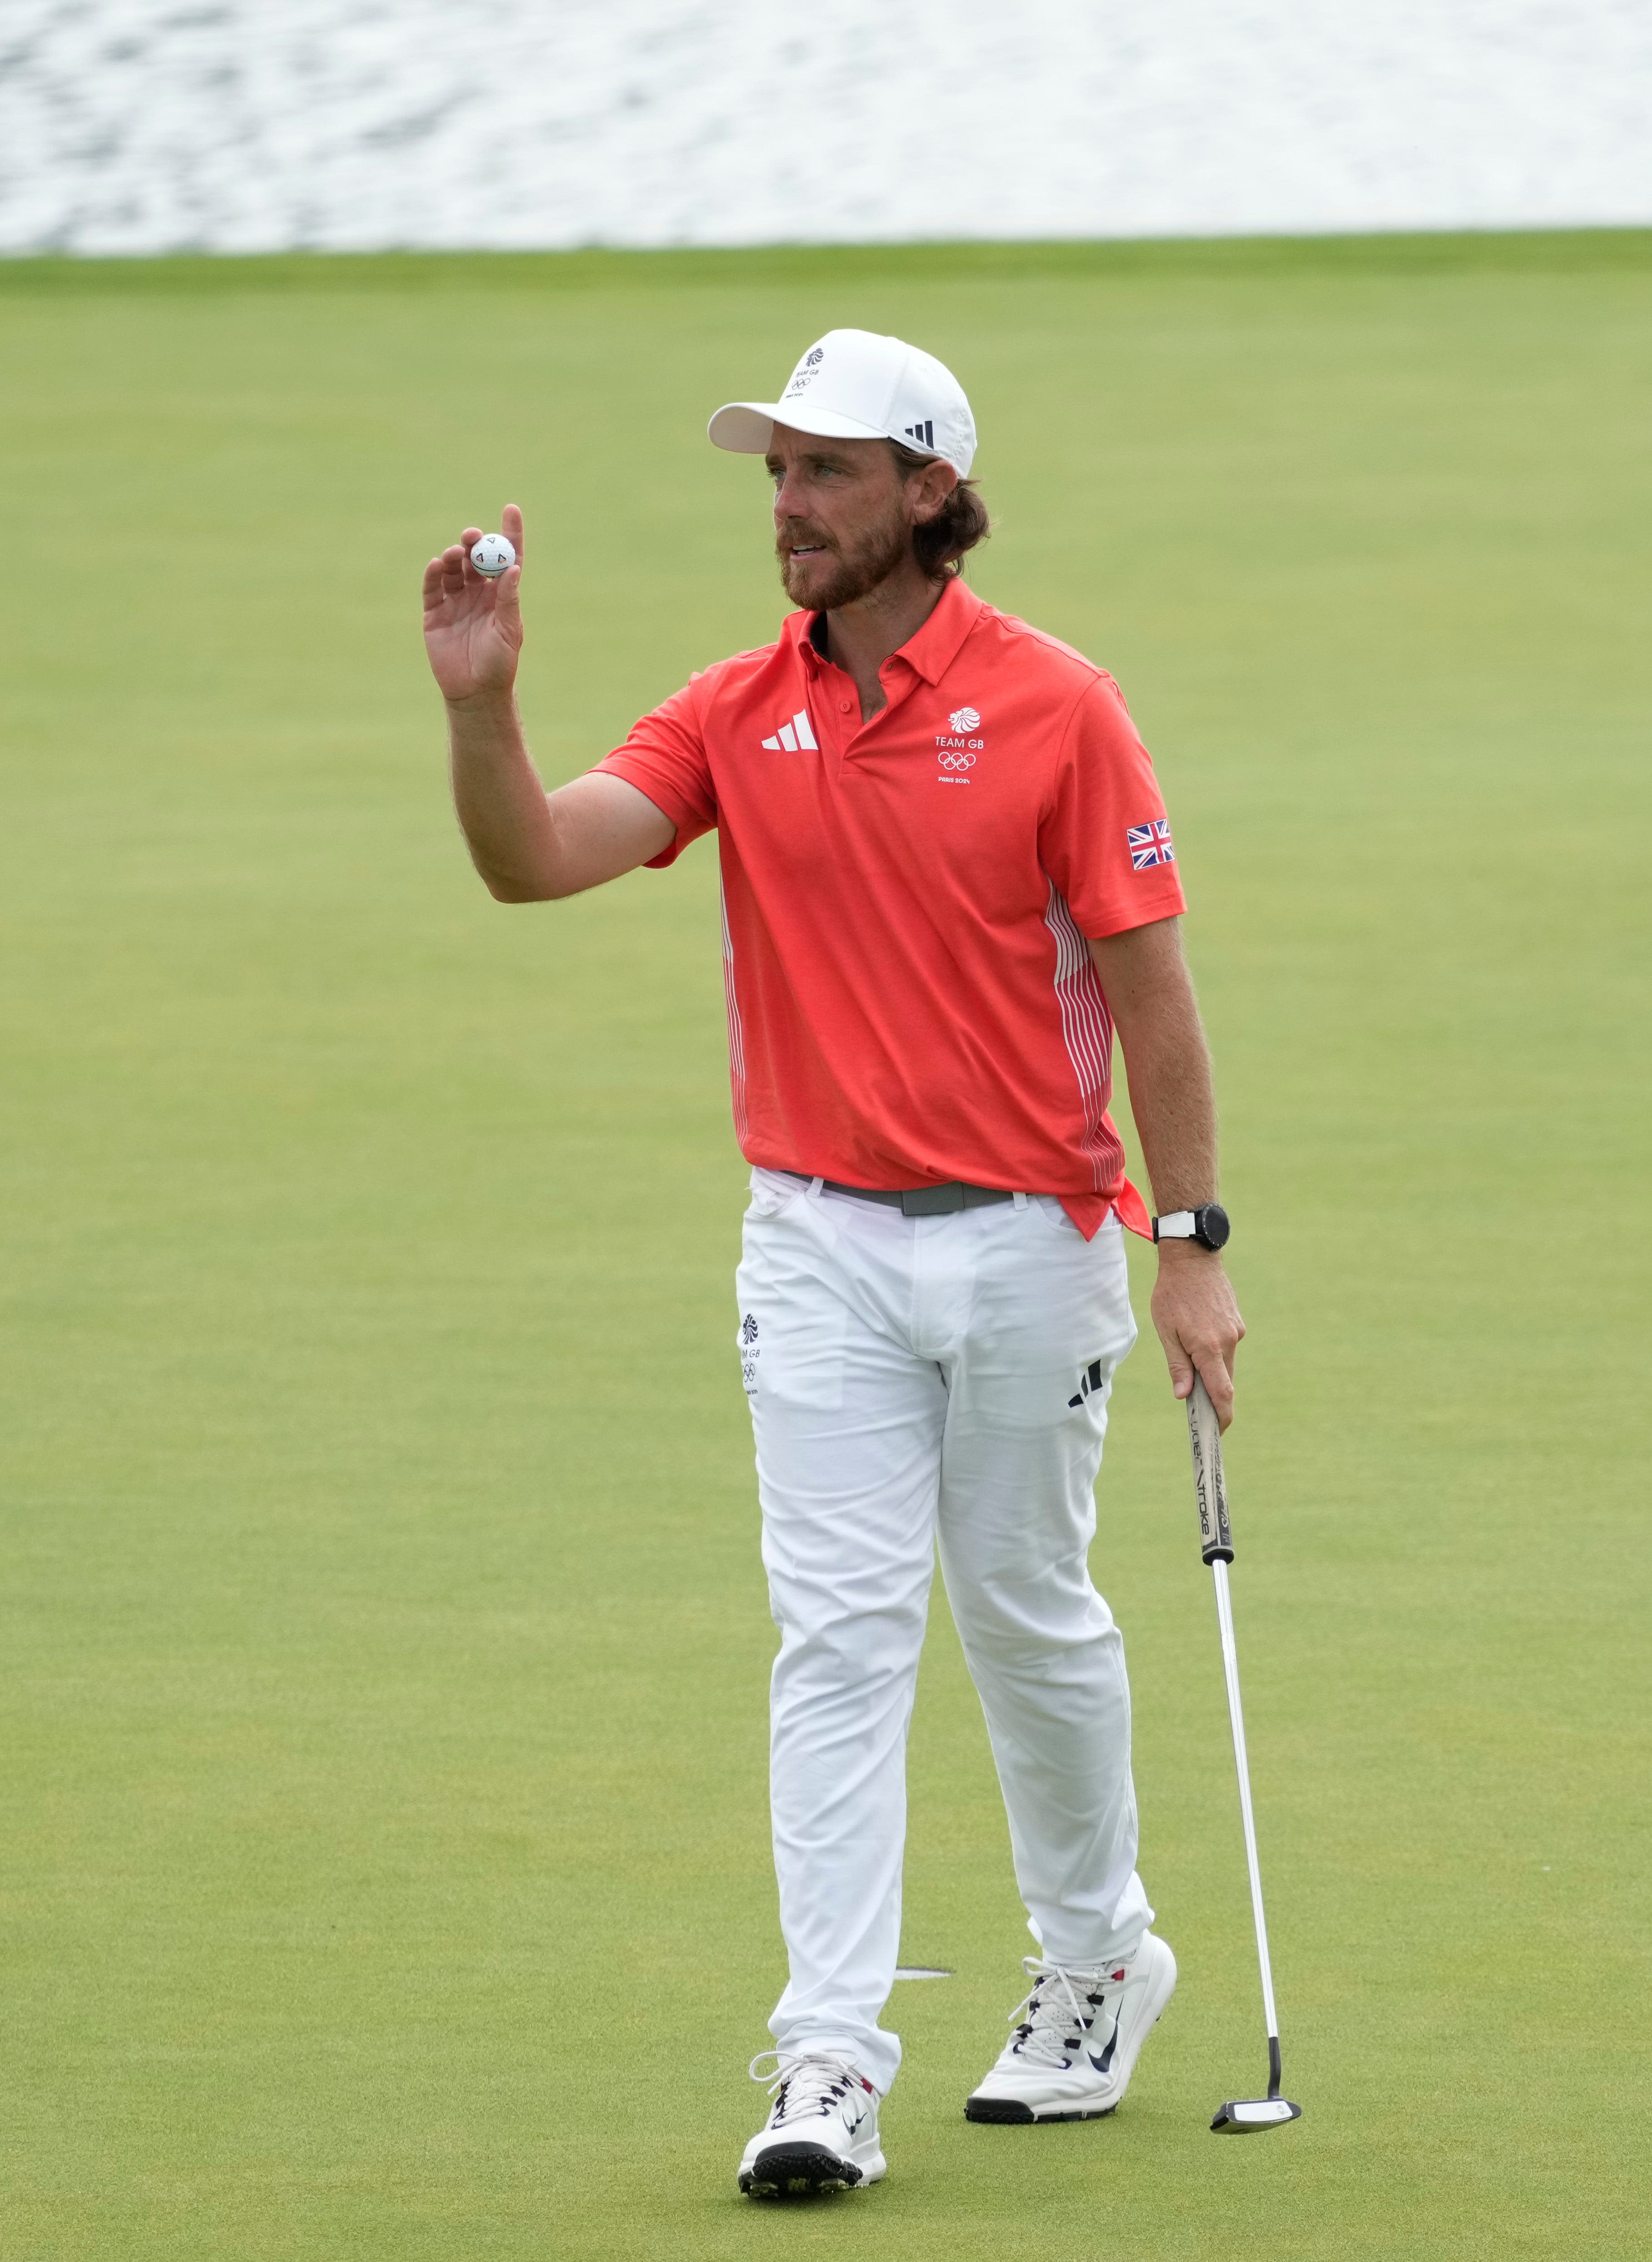 Golfer Tommy Fleetwood plays at Olympics with heavy heart after tragedy in hometown